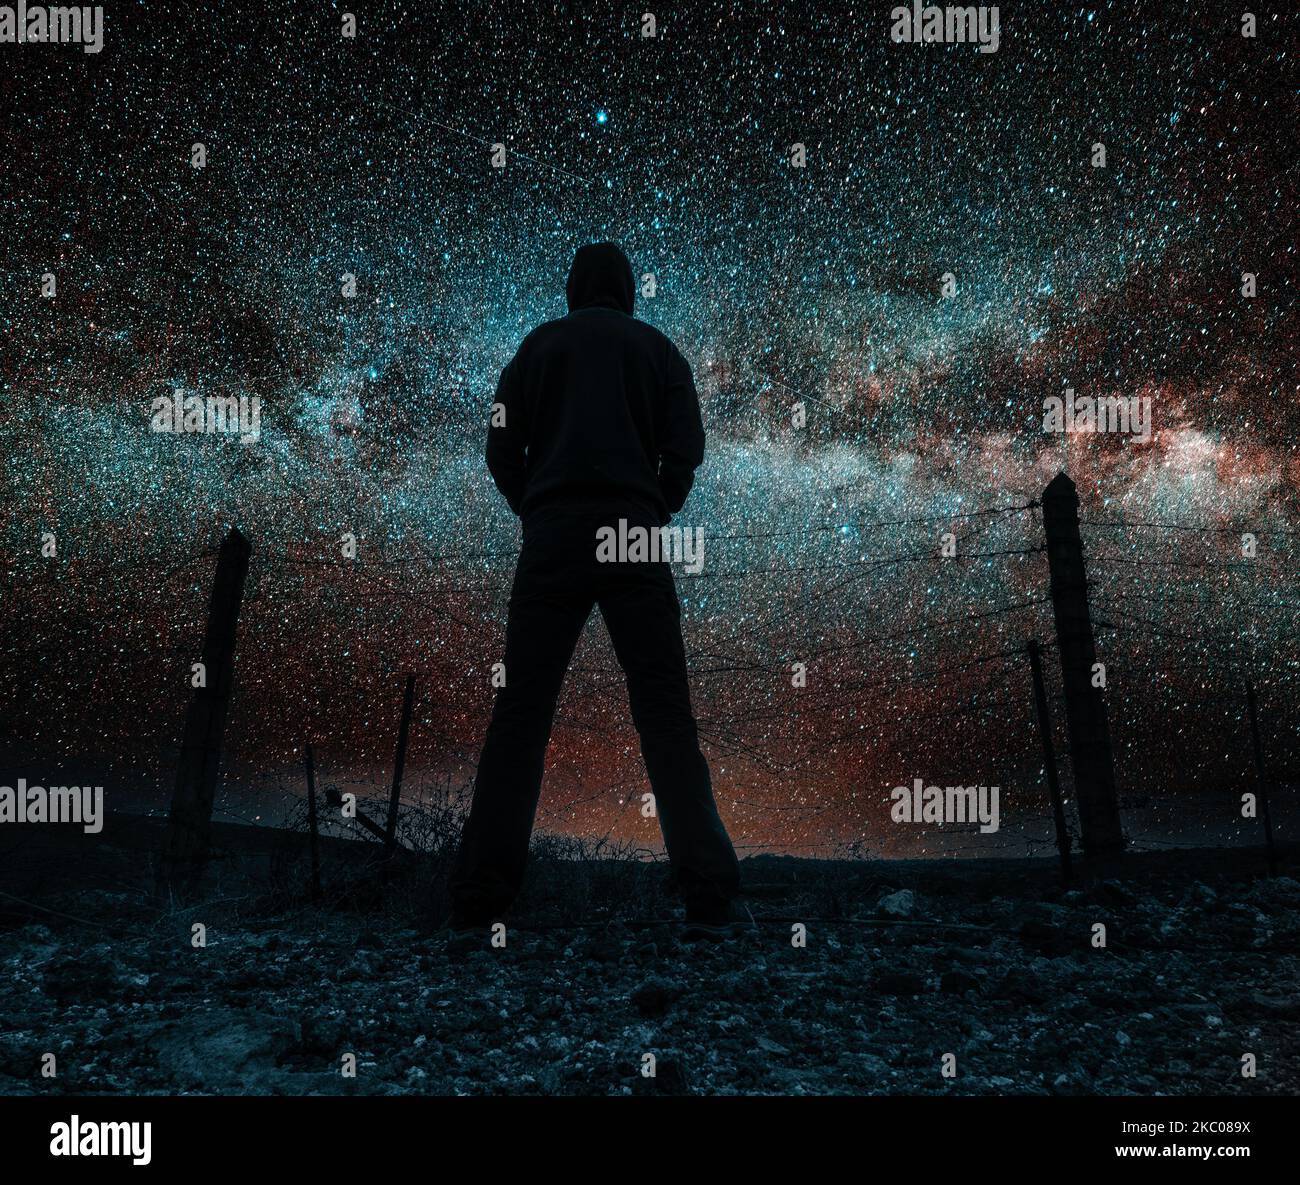 Rear view of man near barbed wire fence stargazing. Dark skies, air pollution... Stock Photo